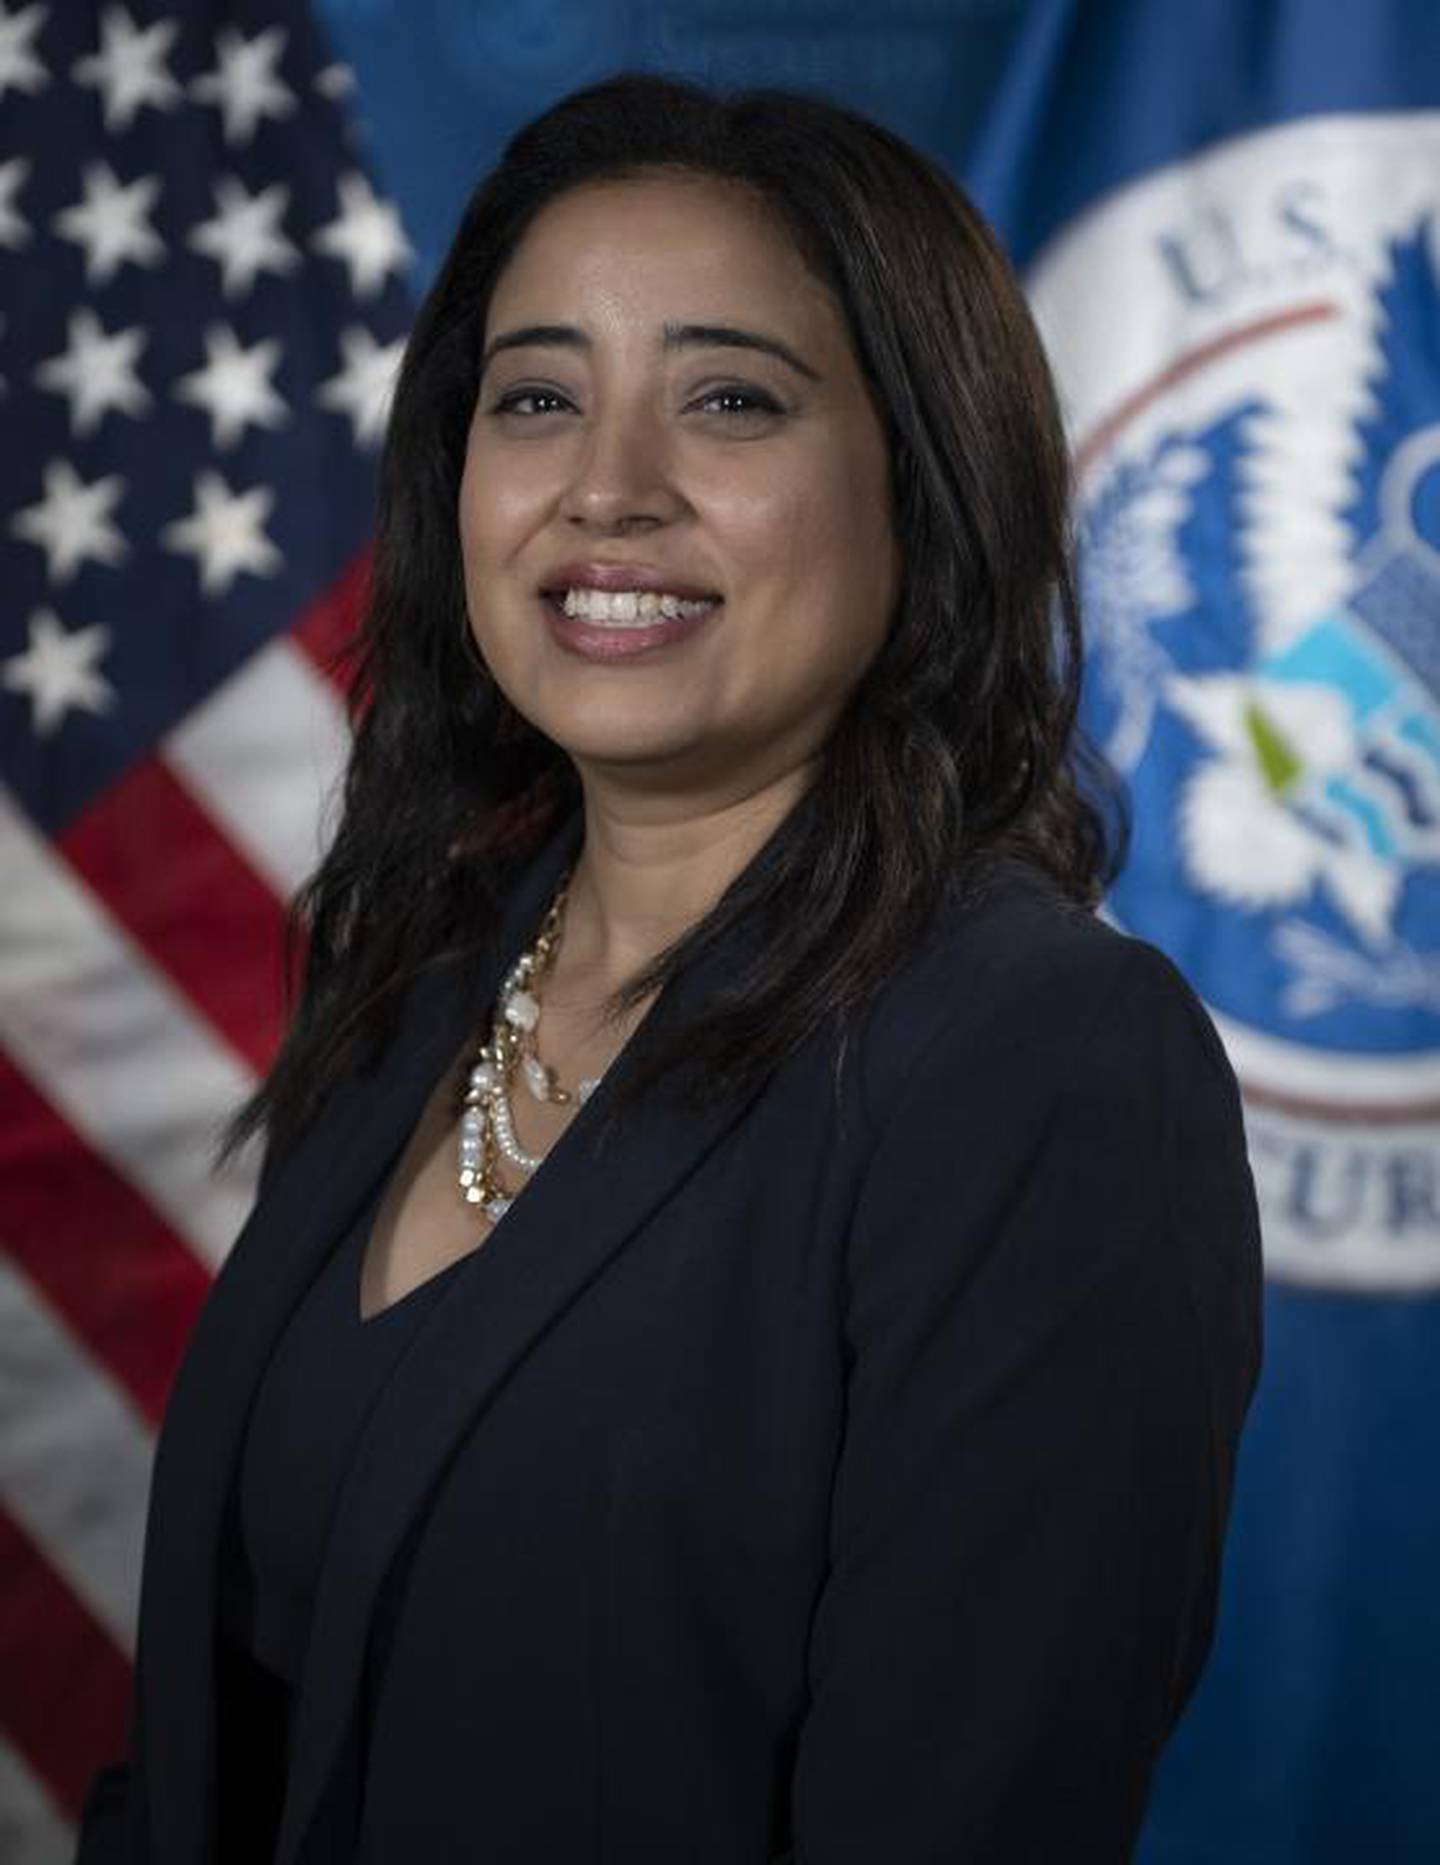 Brenda Abdelall is the daughter of Egyptian immigrants. Photo: US Department of State